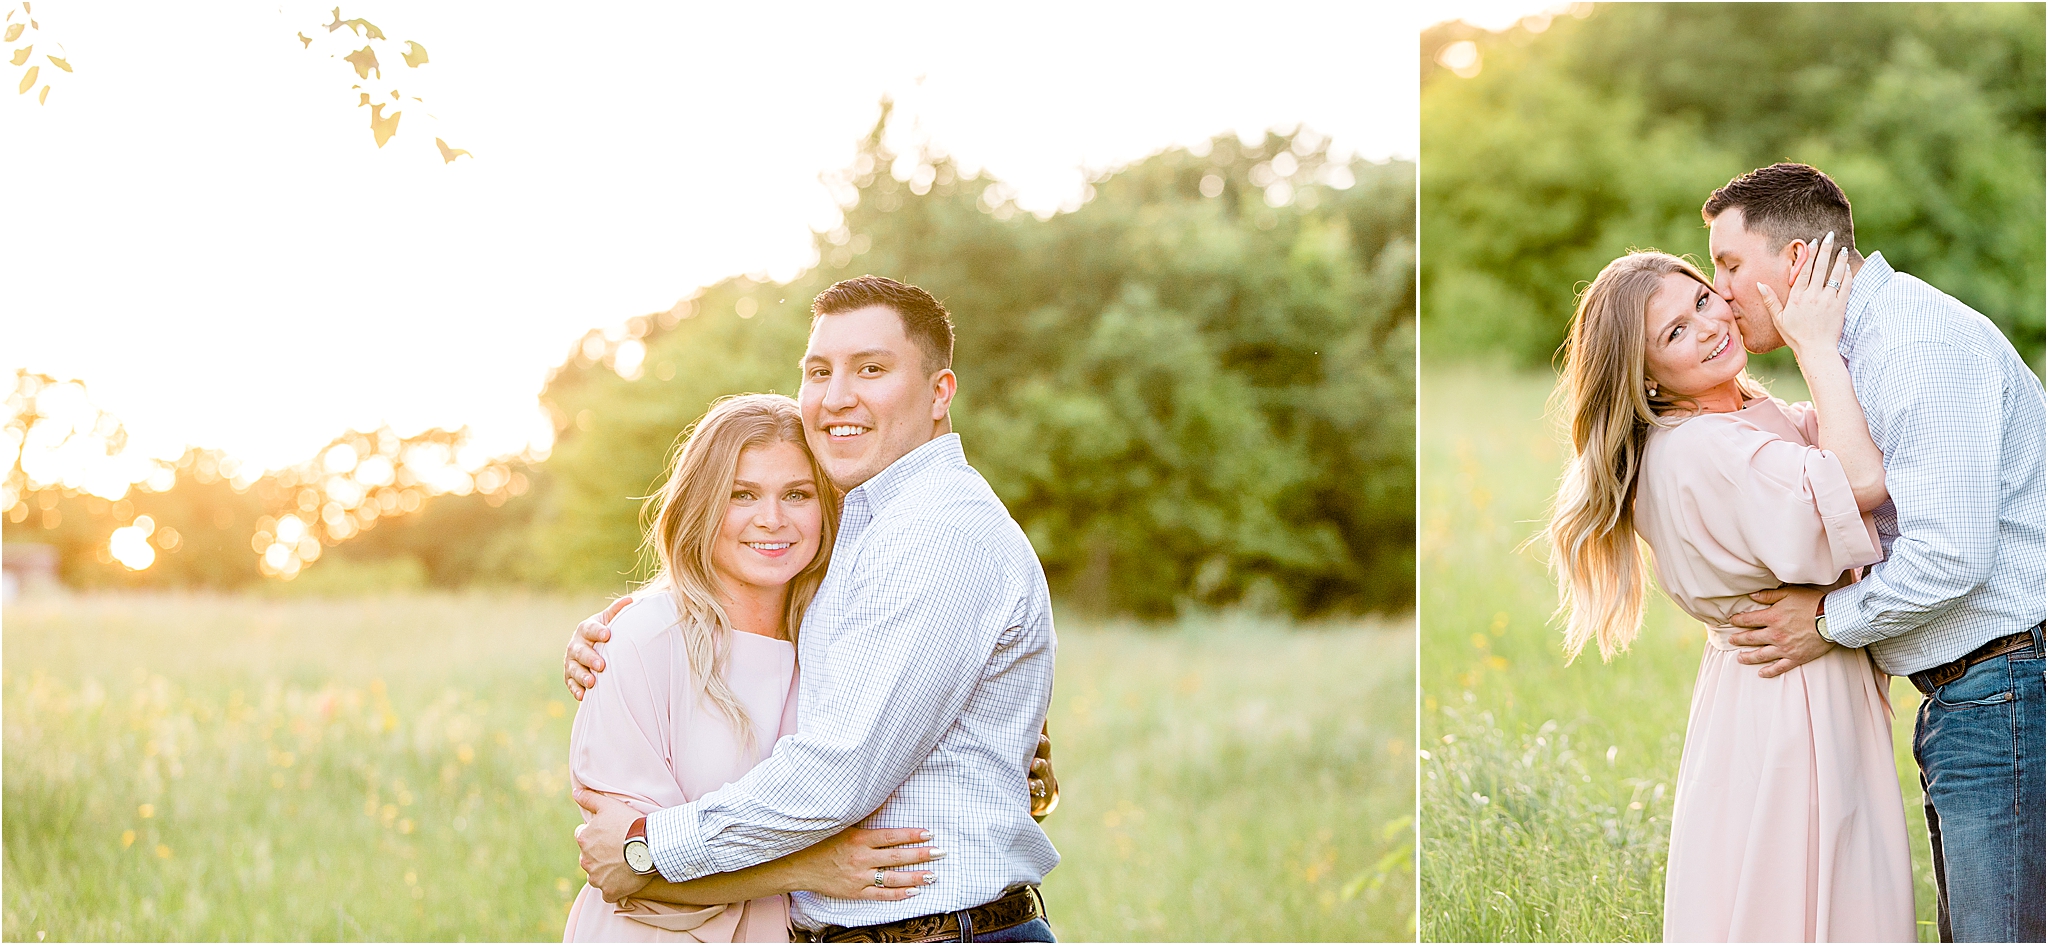 A fiance with dark hair kisses his blonde bride to be on the cheek in a lush green field with flowers while the sun sets in Fort Worth, Texas